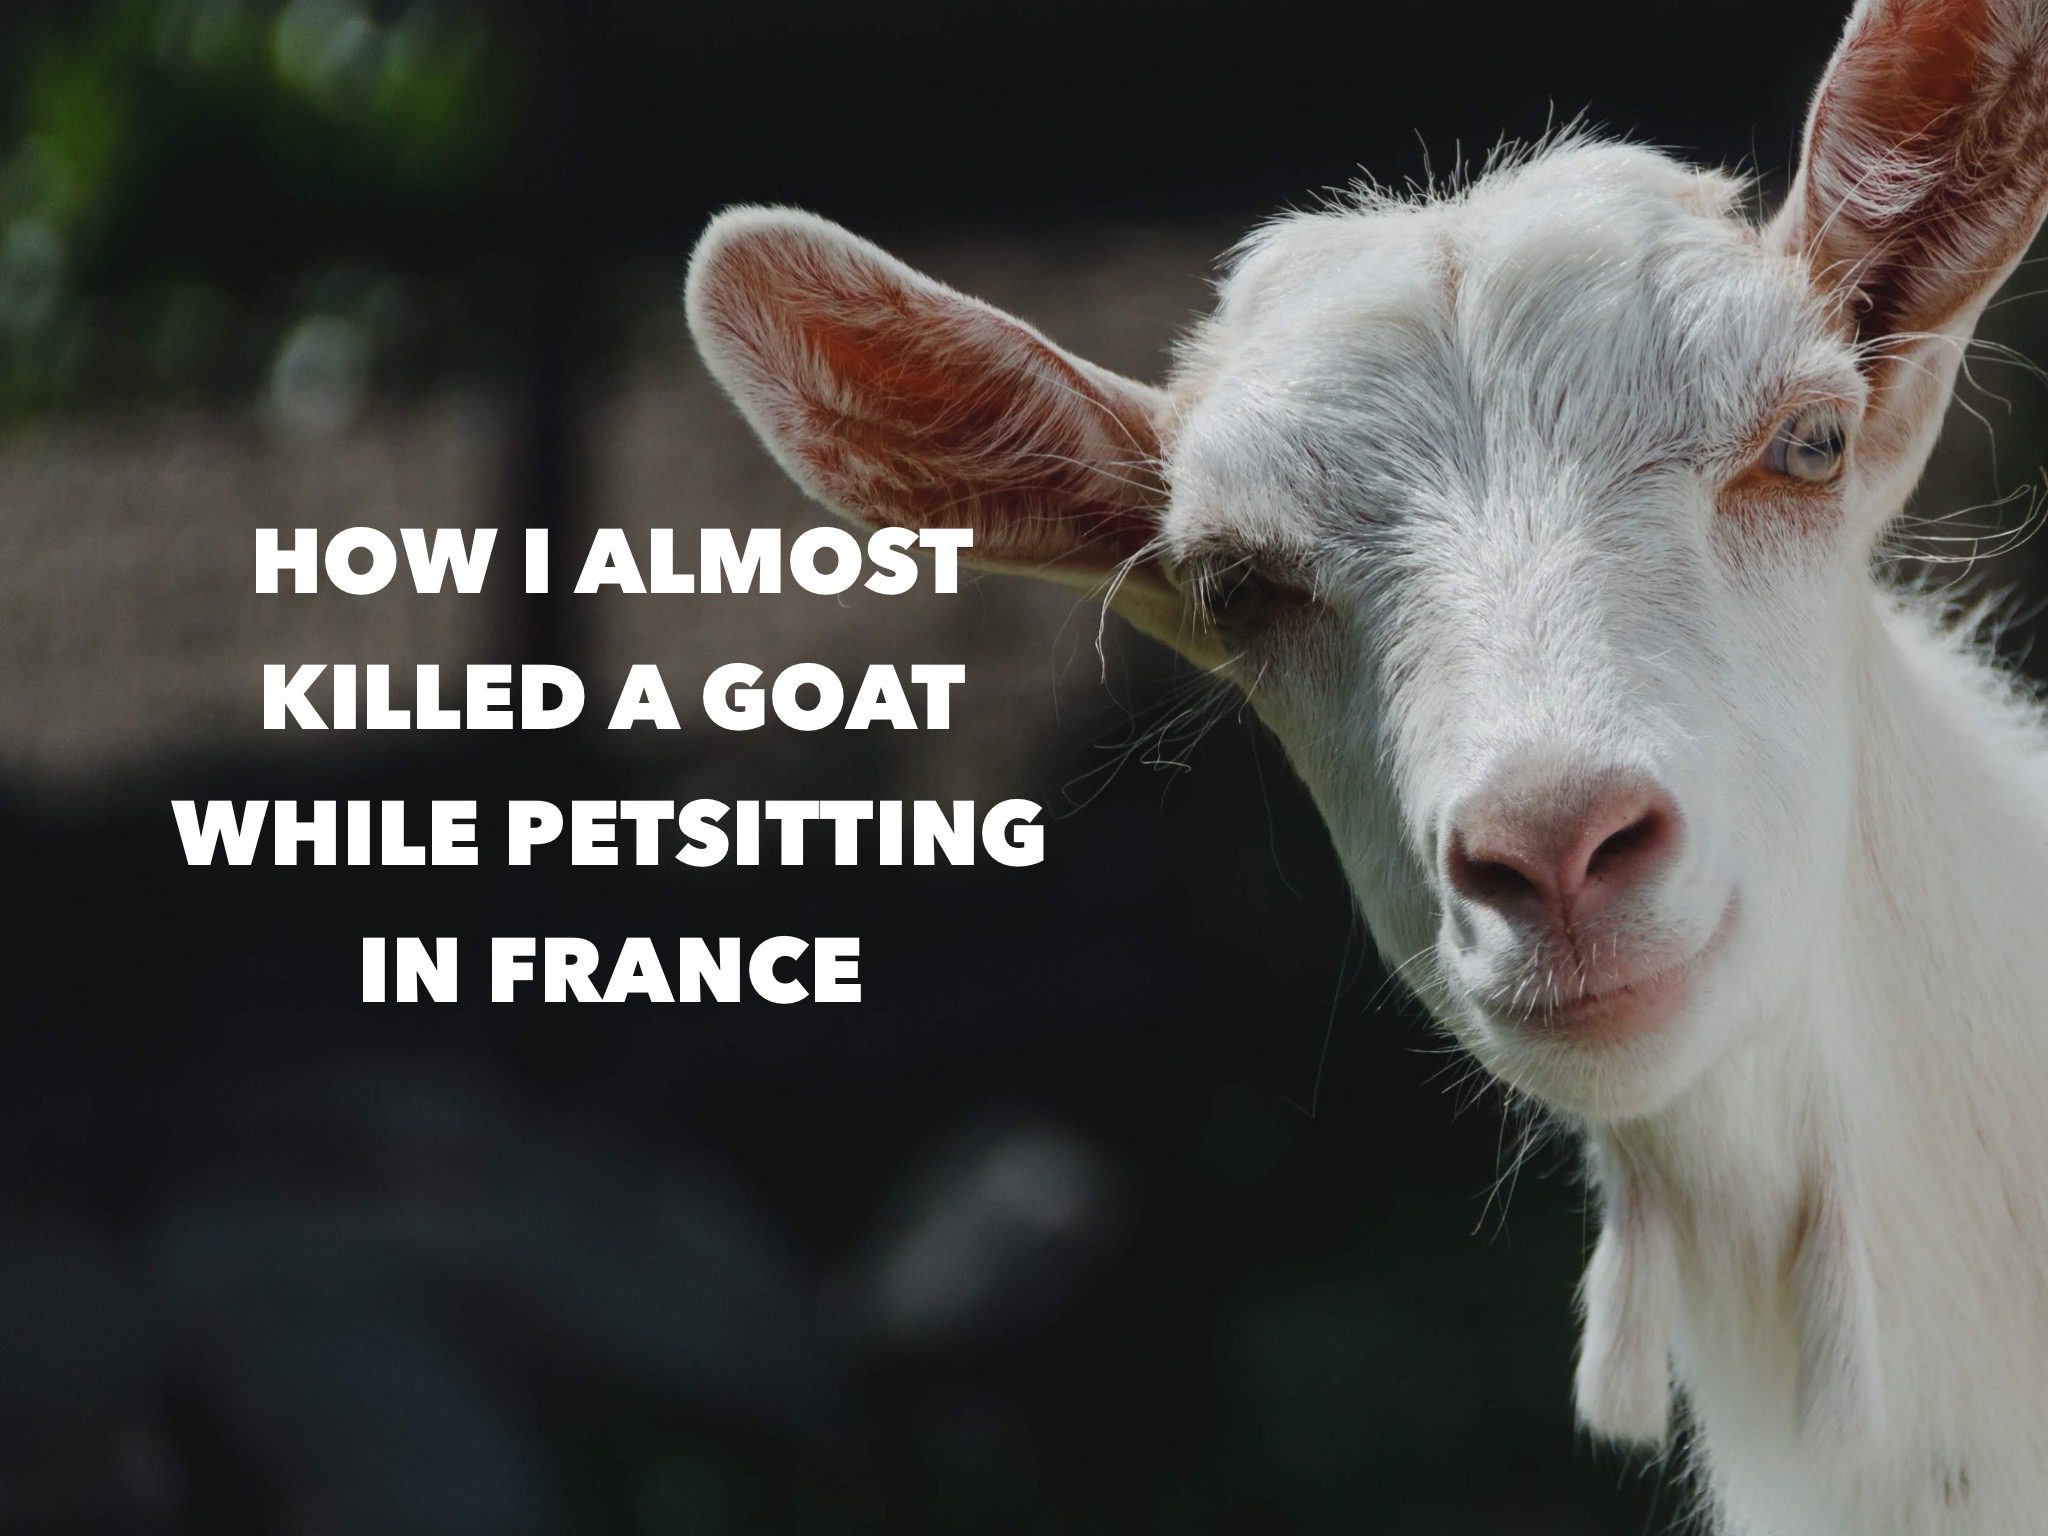 How I Almost Killed A Goat While Petsitting in France